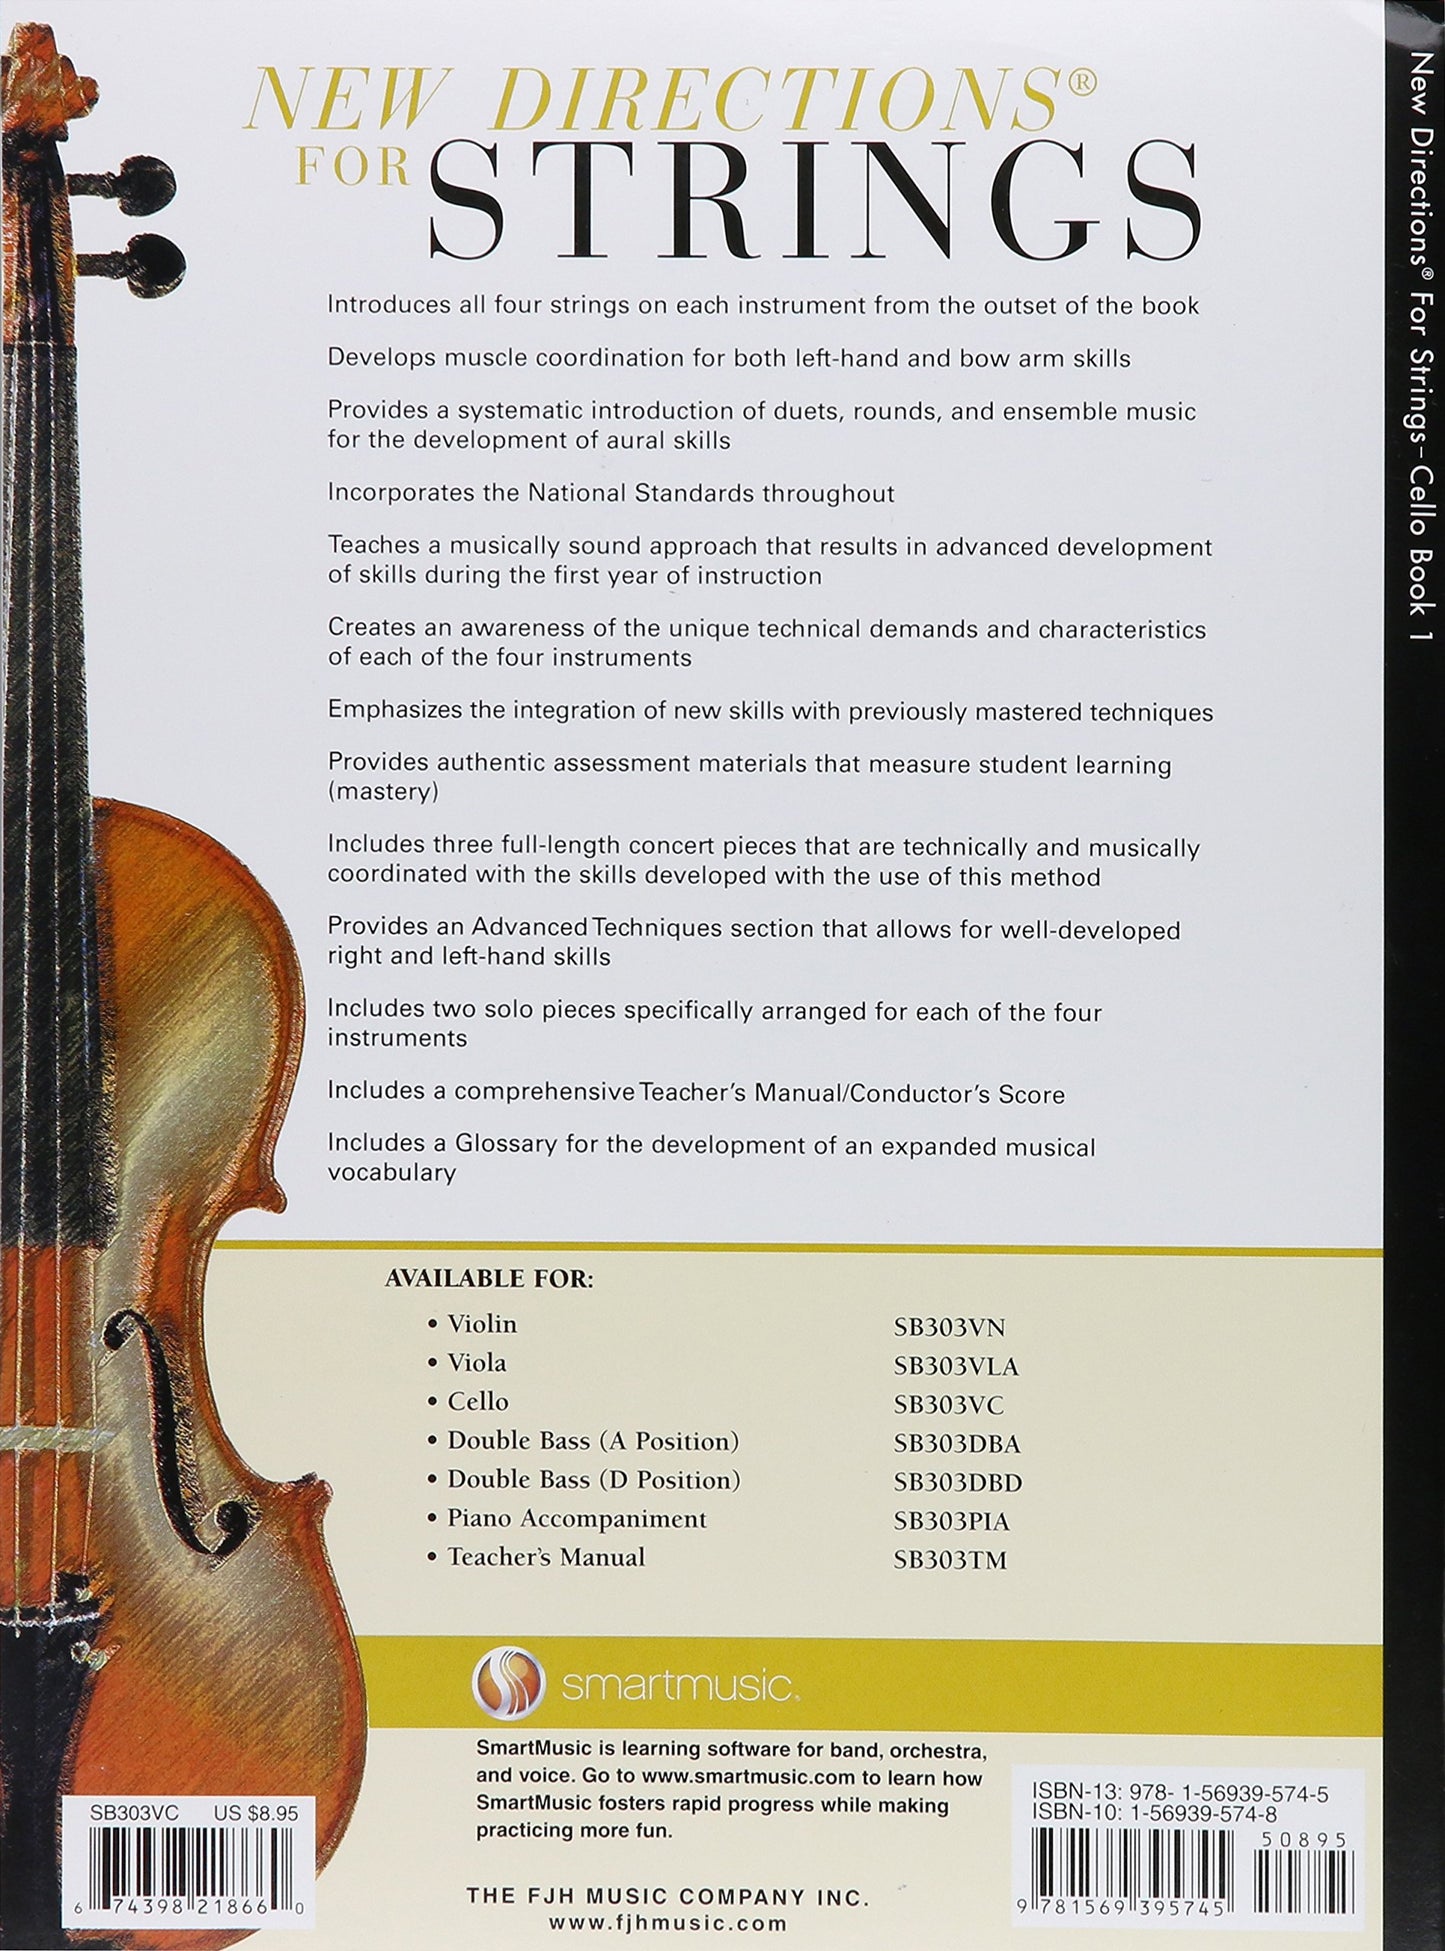 New Direction for Strings - Cello Book 1